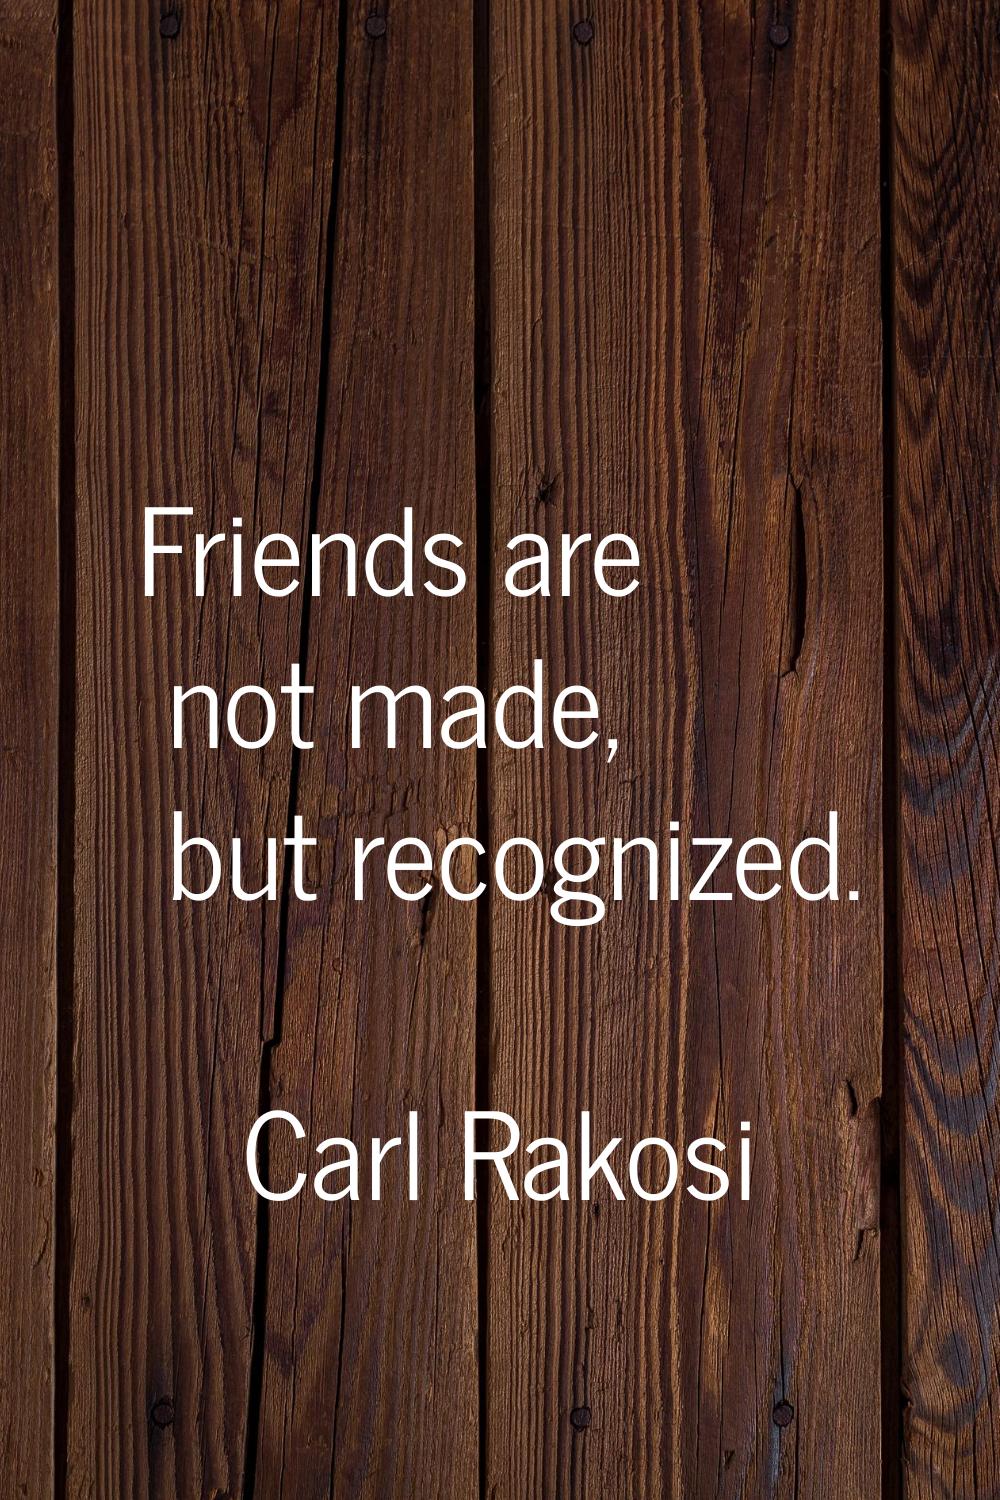 Friends are not made, but recognized.